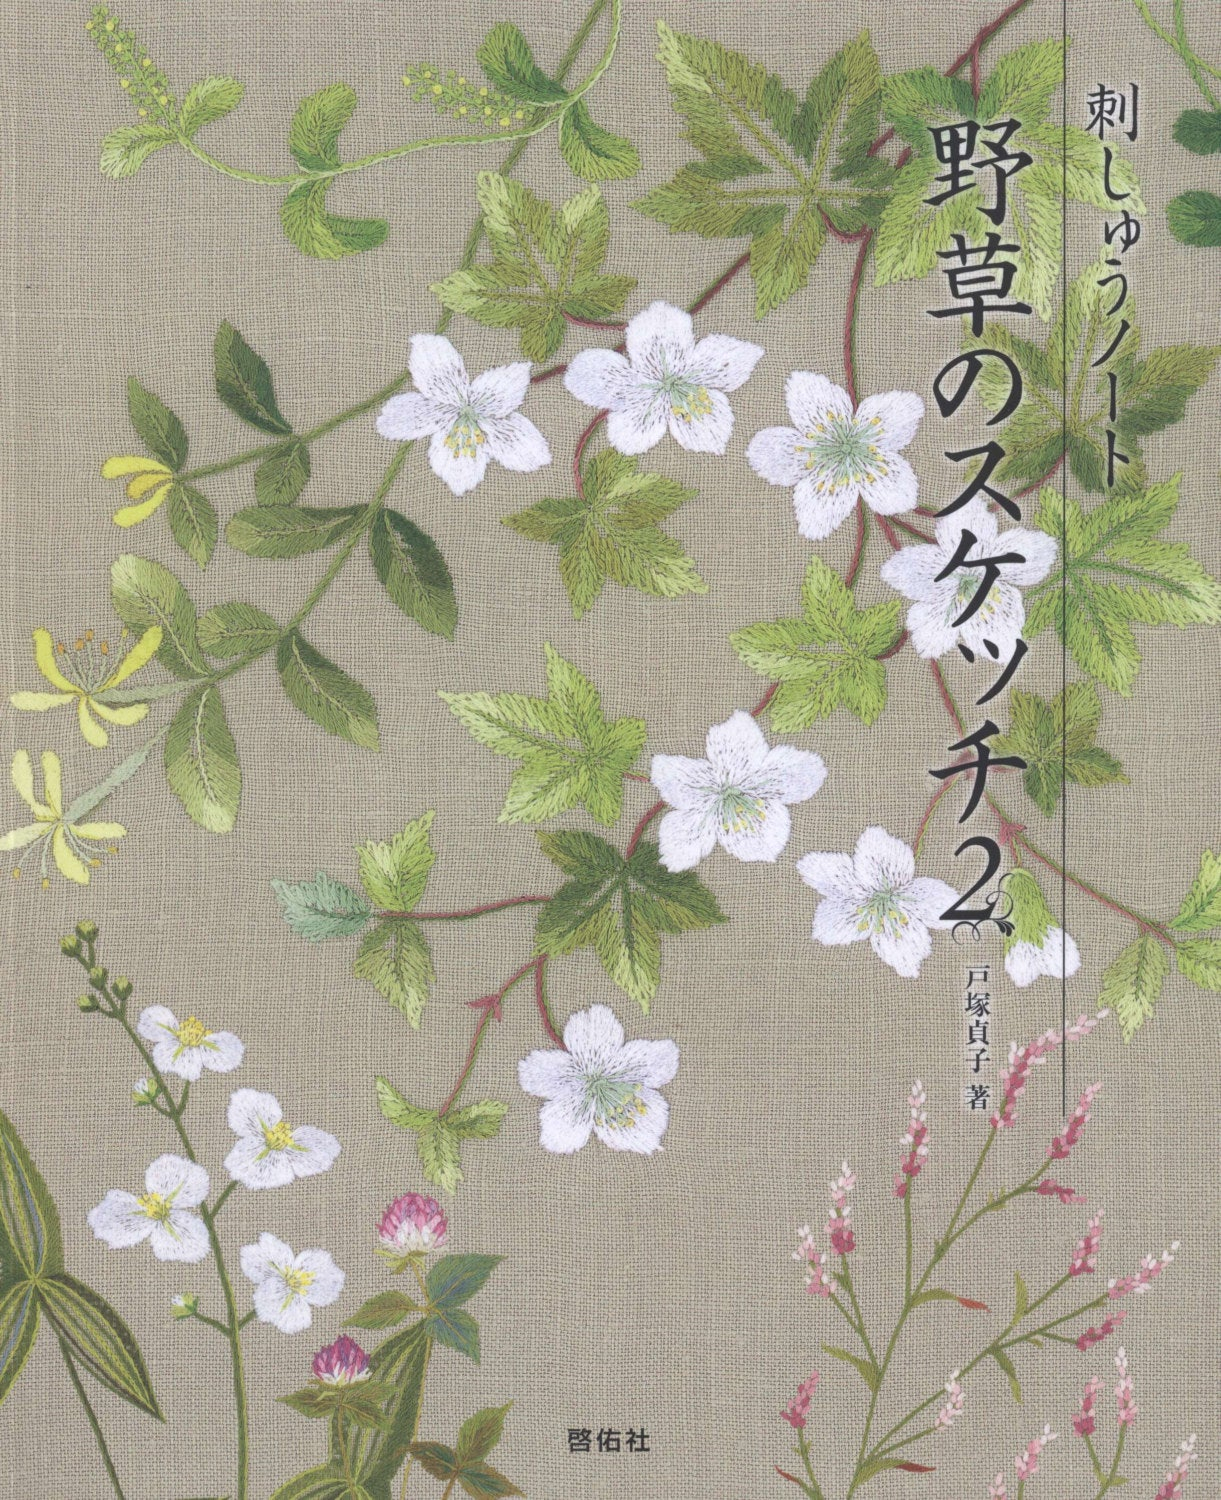 Flower Embroidery Patterns 59 Embroidery Patterns Flower Embroidery Embroidery Pattern Botanical Japanese Embroidery Book Ebook Pdf Instant Download